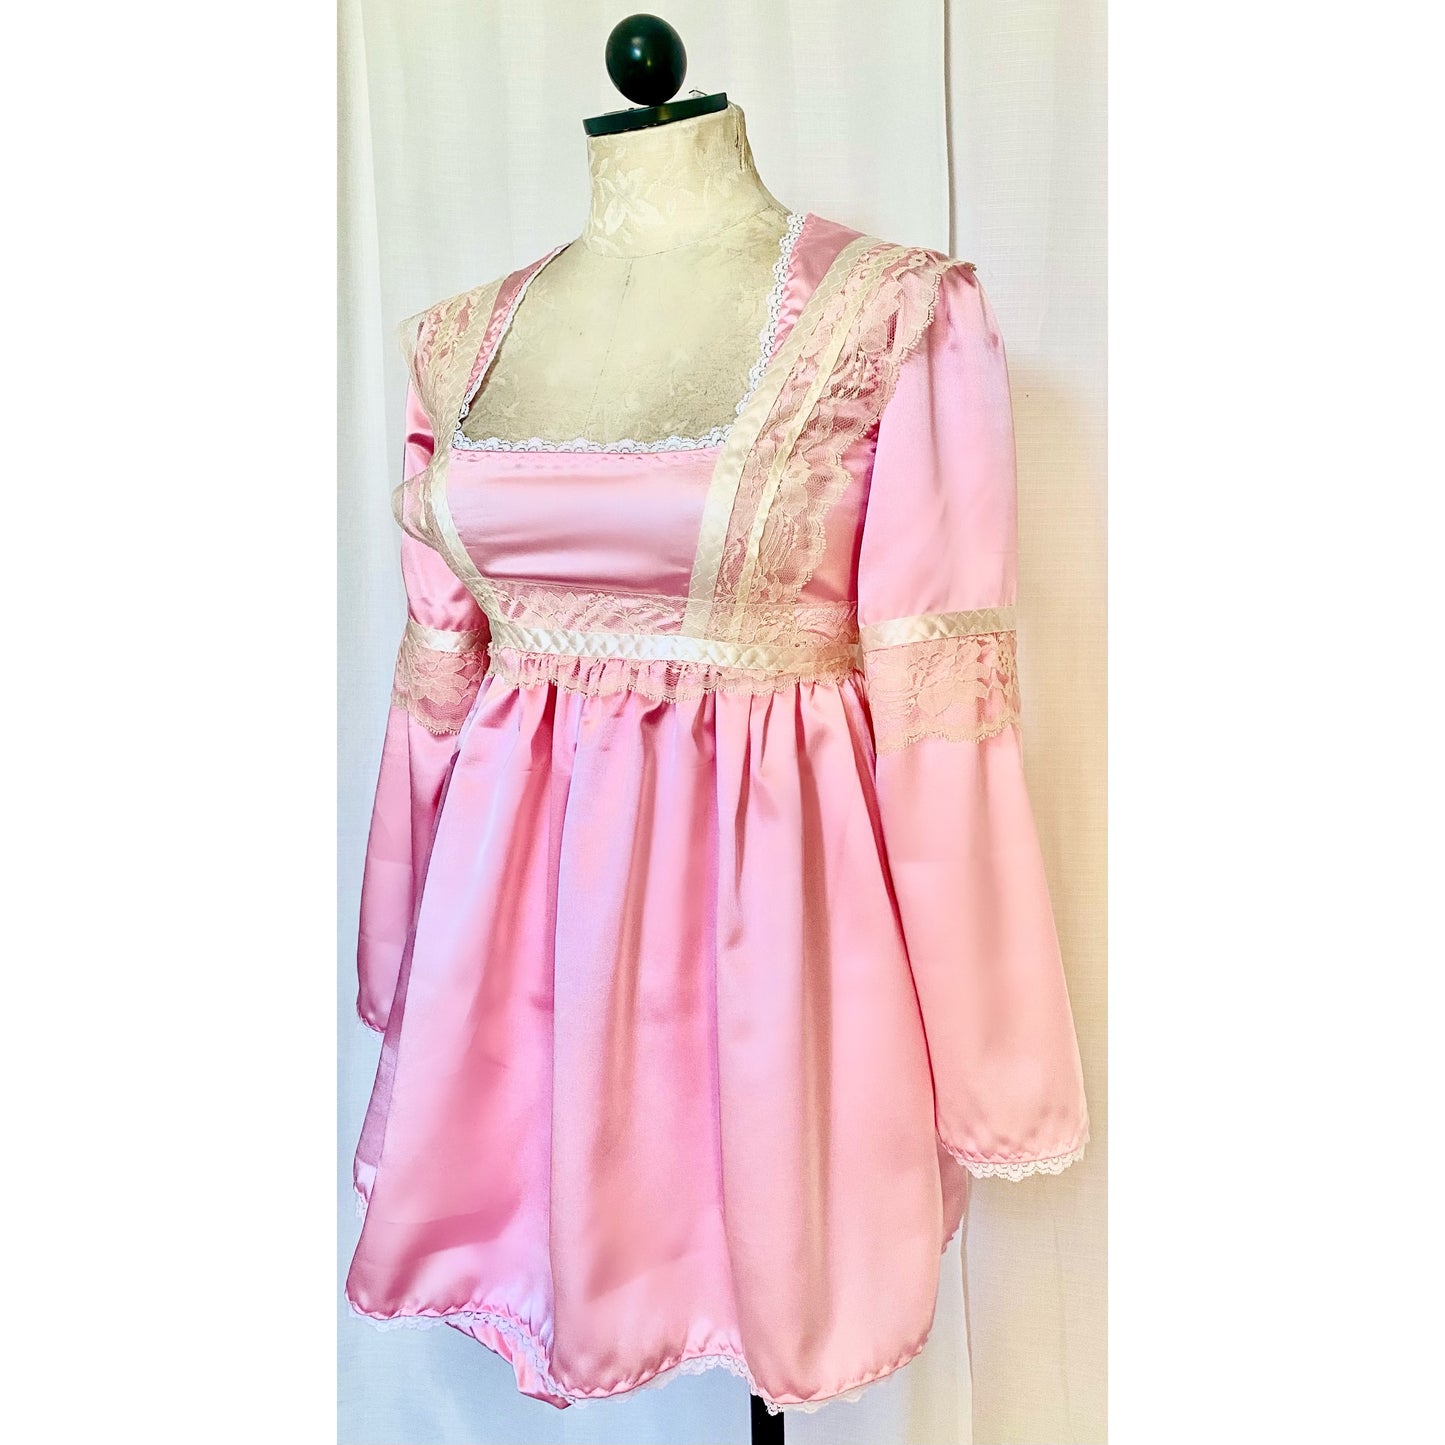 The Lana Dres in Pink Satin